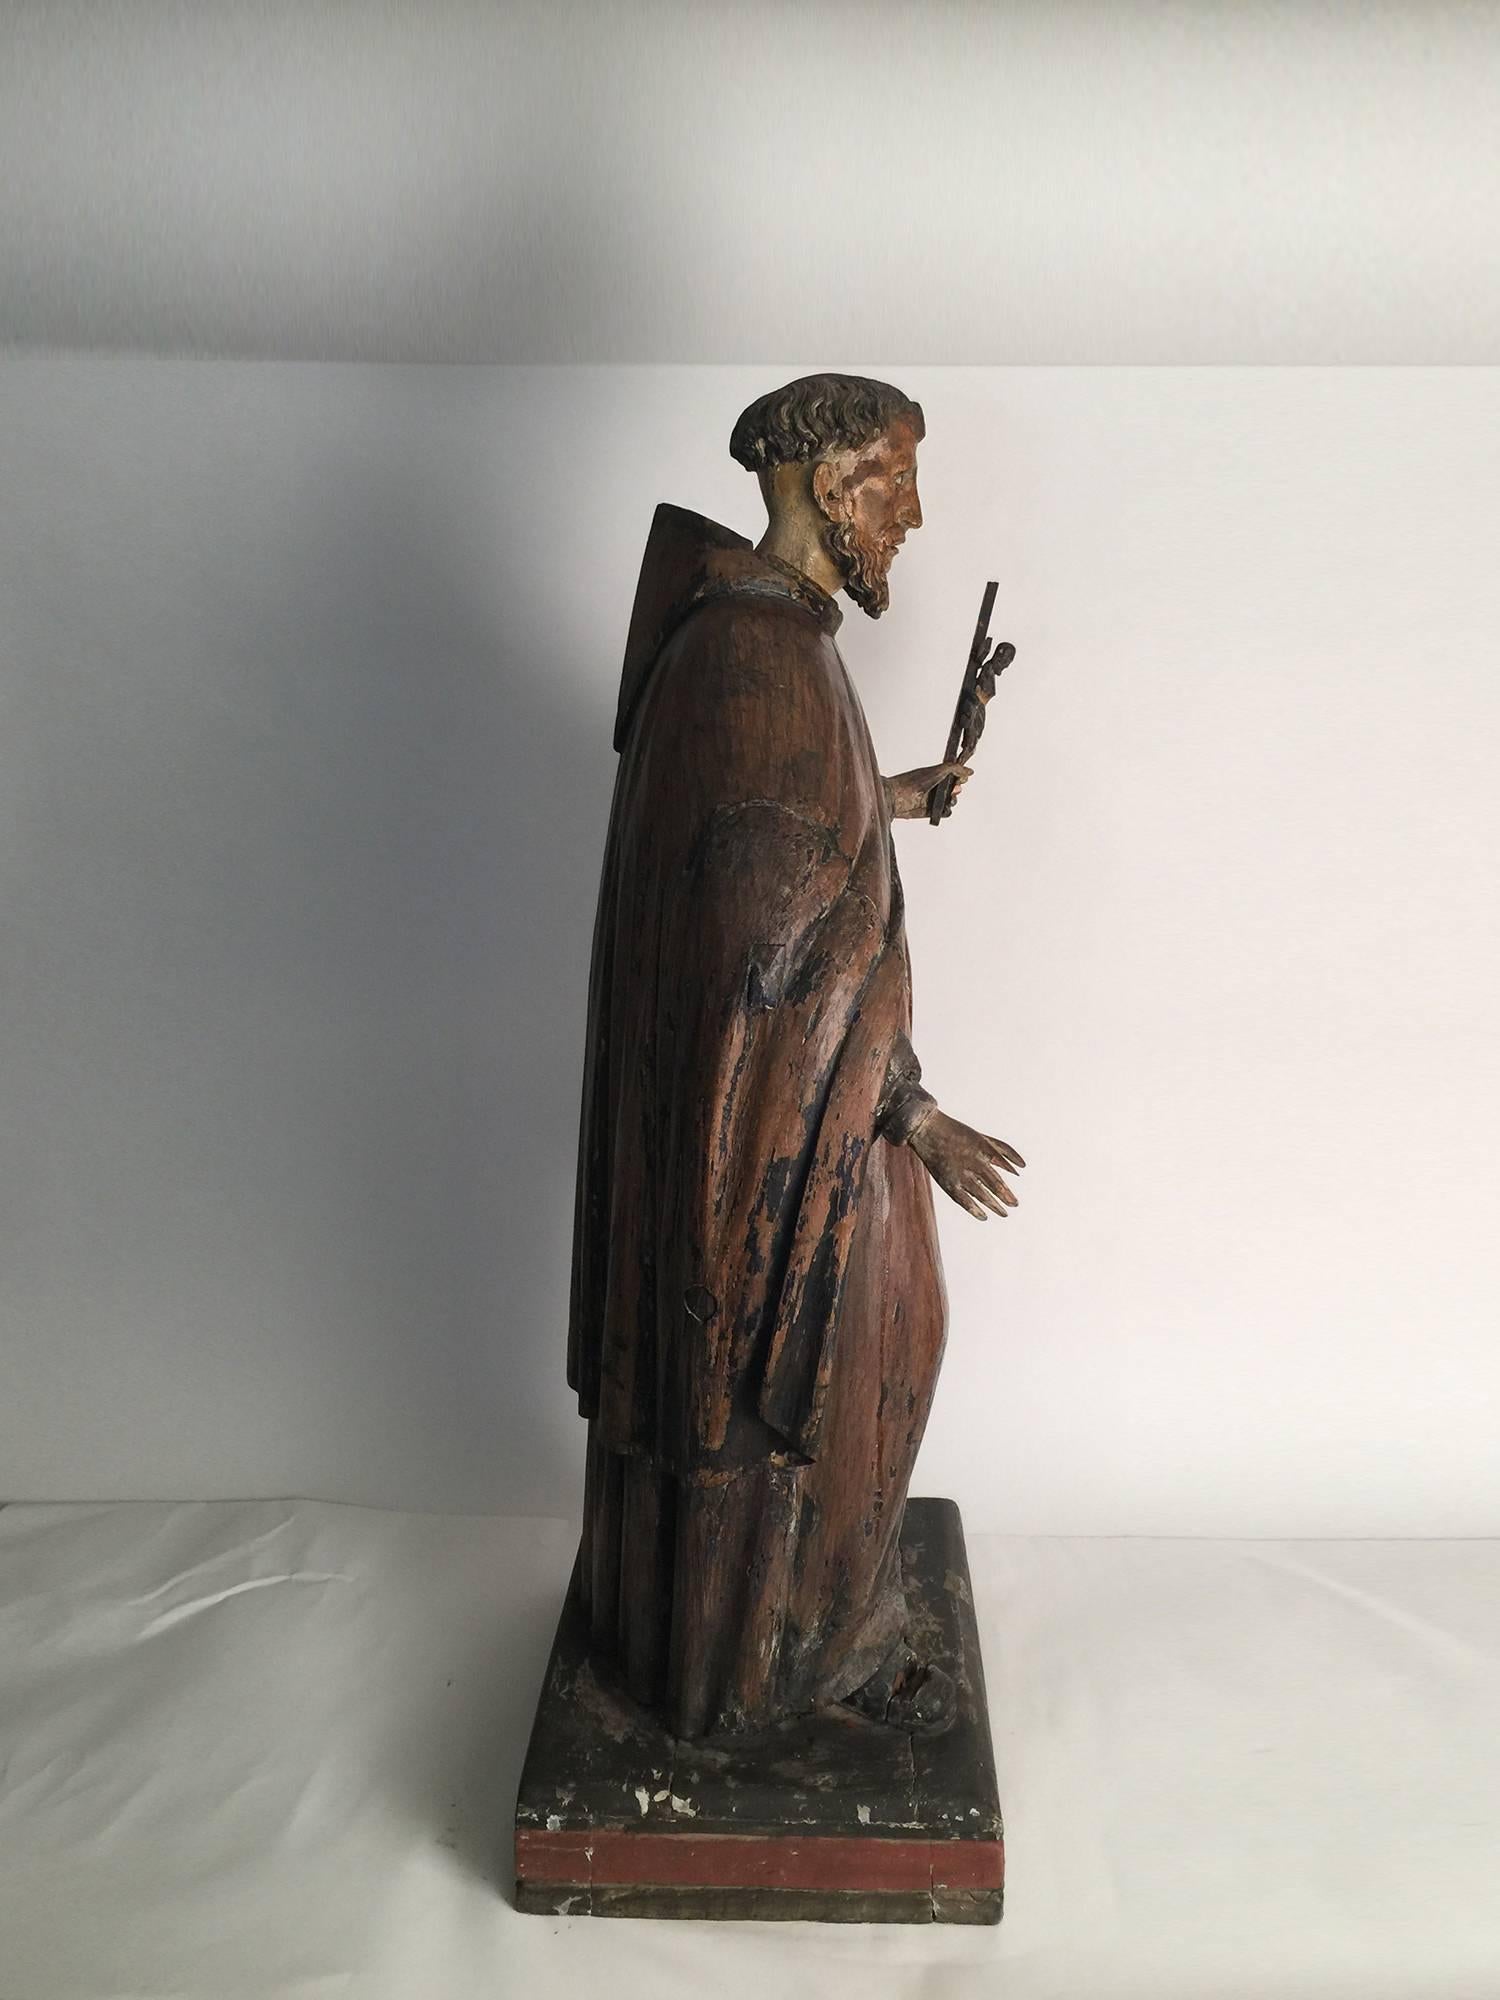 Polychromed 18th Century Hand-Carved and Painted Sculpture of Saint Anthony